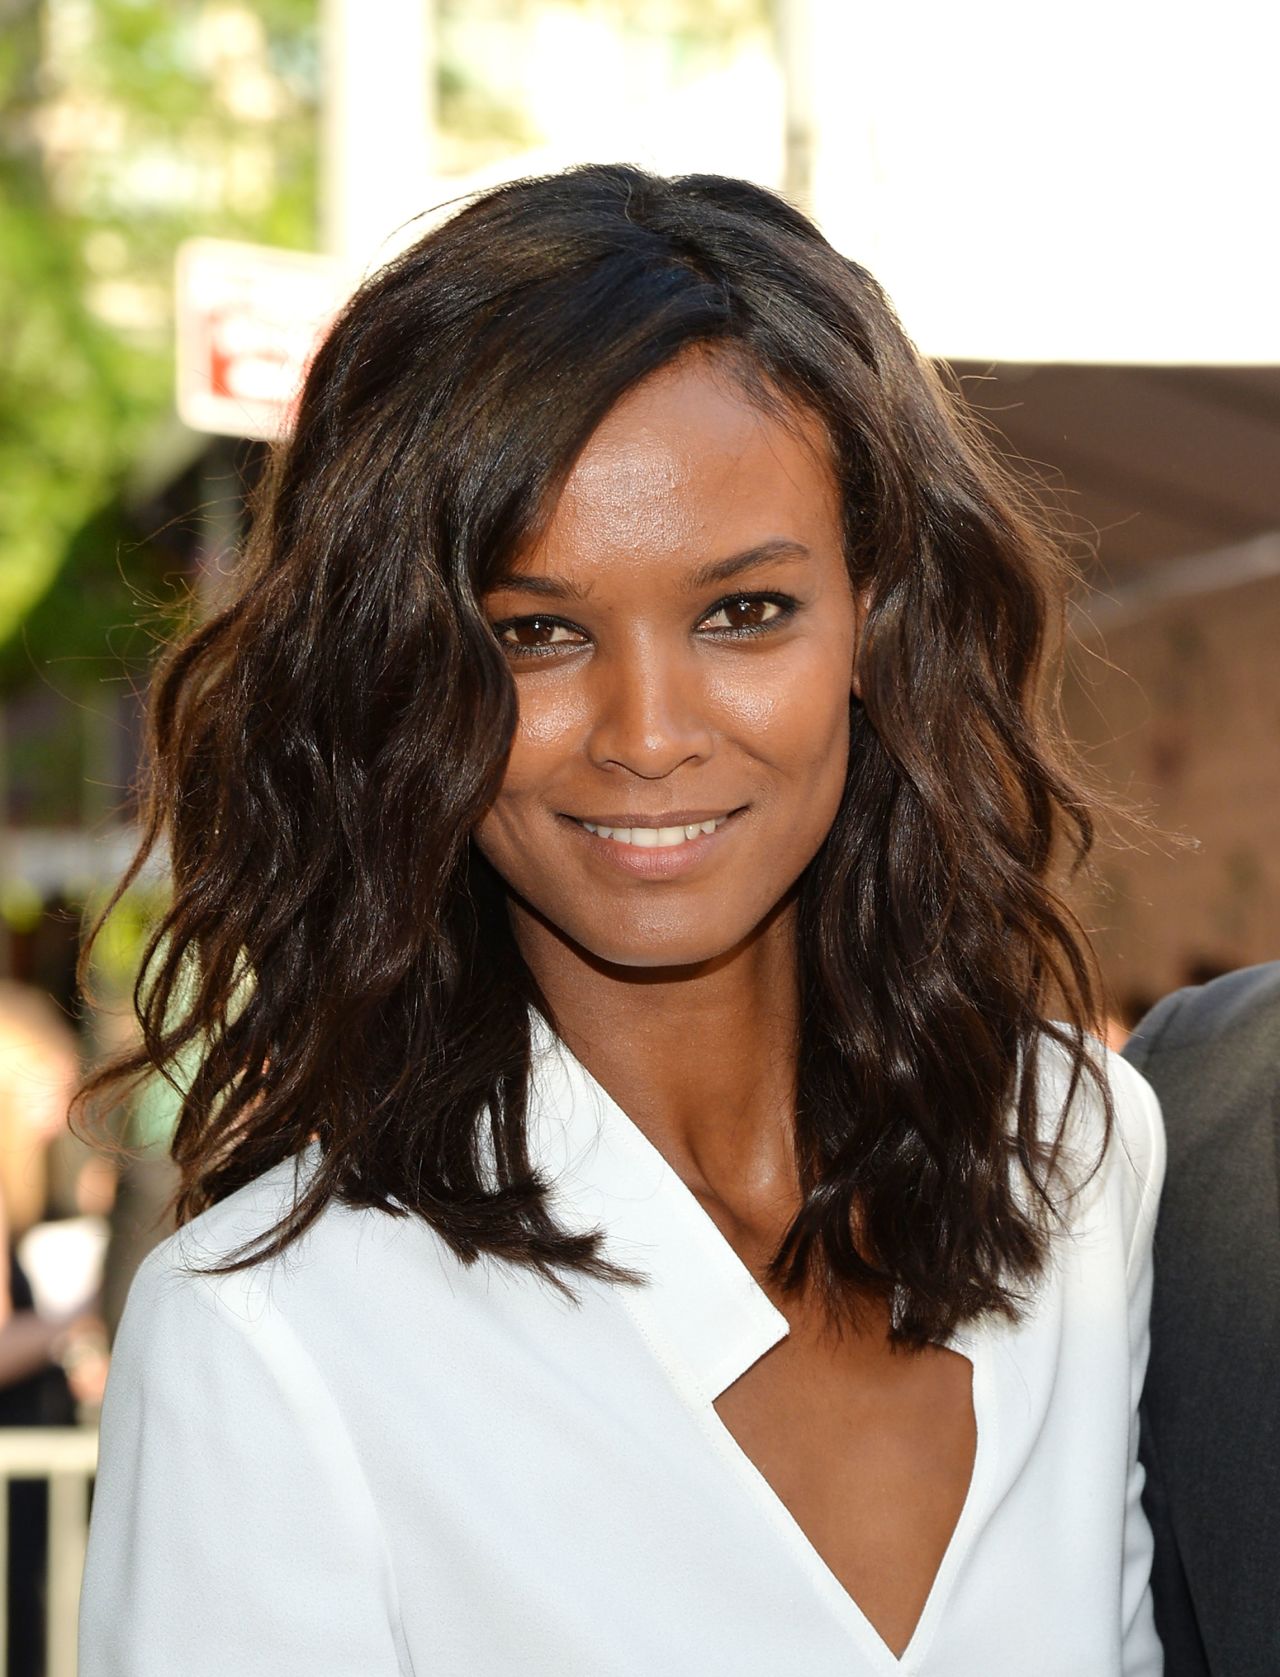 Ethiopian-born fashion model Liya Kebede is more than just a pretty face. She launched her own fashion label, Lemlem, in 2007. Her designs are influenced by her heritage and are made from fabrics handwoven in Ethiopia. 